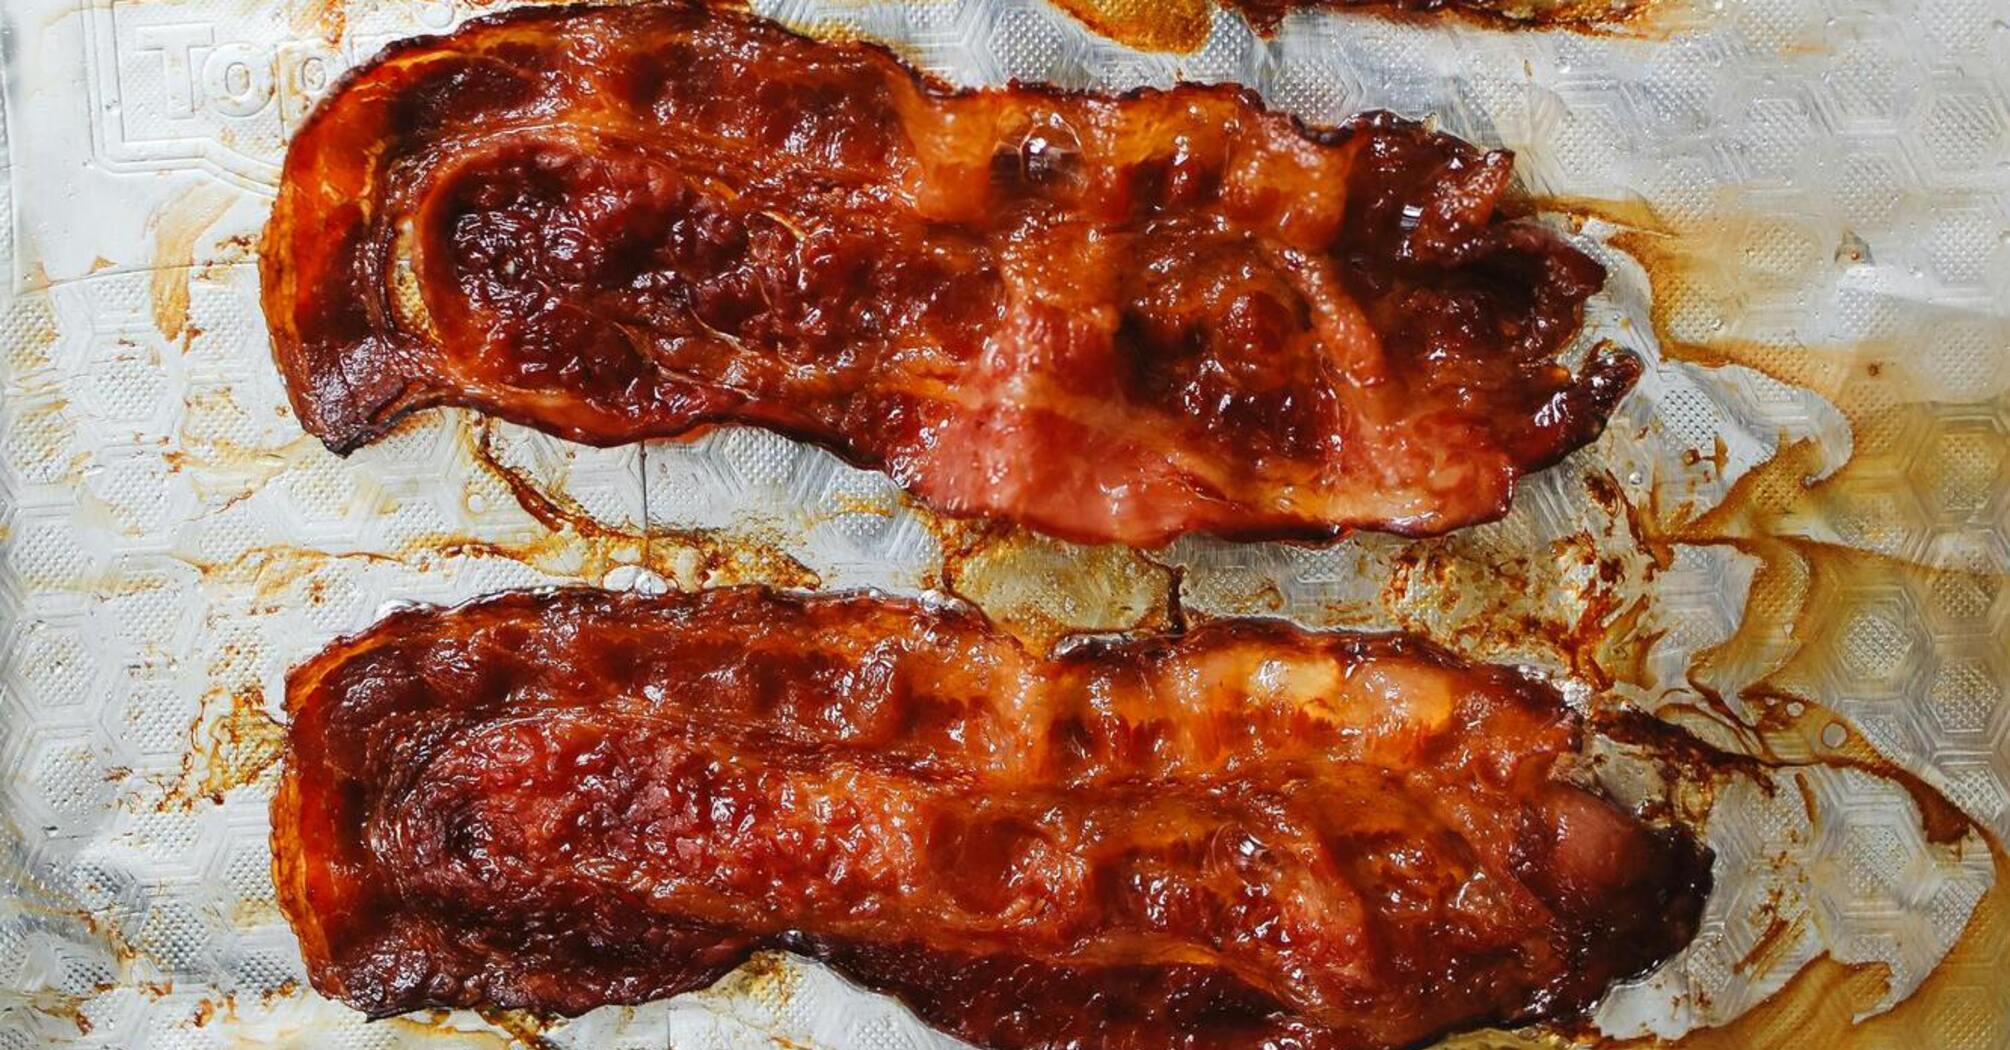 The best way to cook bacon at home